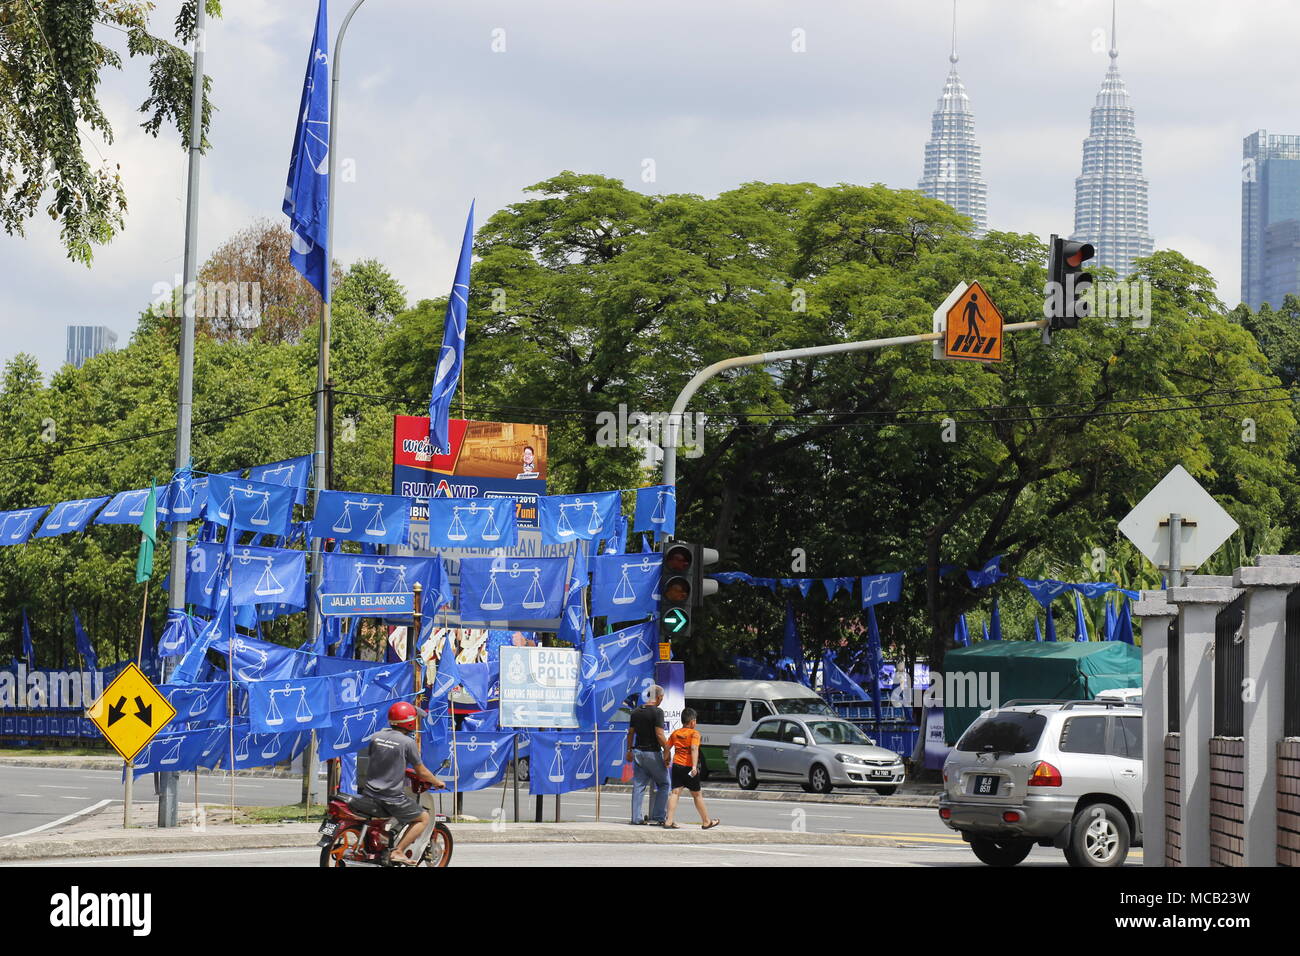 Kuala Lumpur, Malaysia. 15th April, 2018. The upcoming May 2018 general elections is expected to be a keenly contested fight between the ruling coalition party and the opposition alliance. Which way will it go? Blue flags seen here belong to the ruling party Barisan Nasional. The iconic Petronas Twin Towers is photographed in the background. Credit: Beaconstox/Alamy Live News. Stock Photo